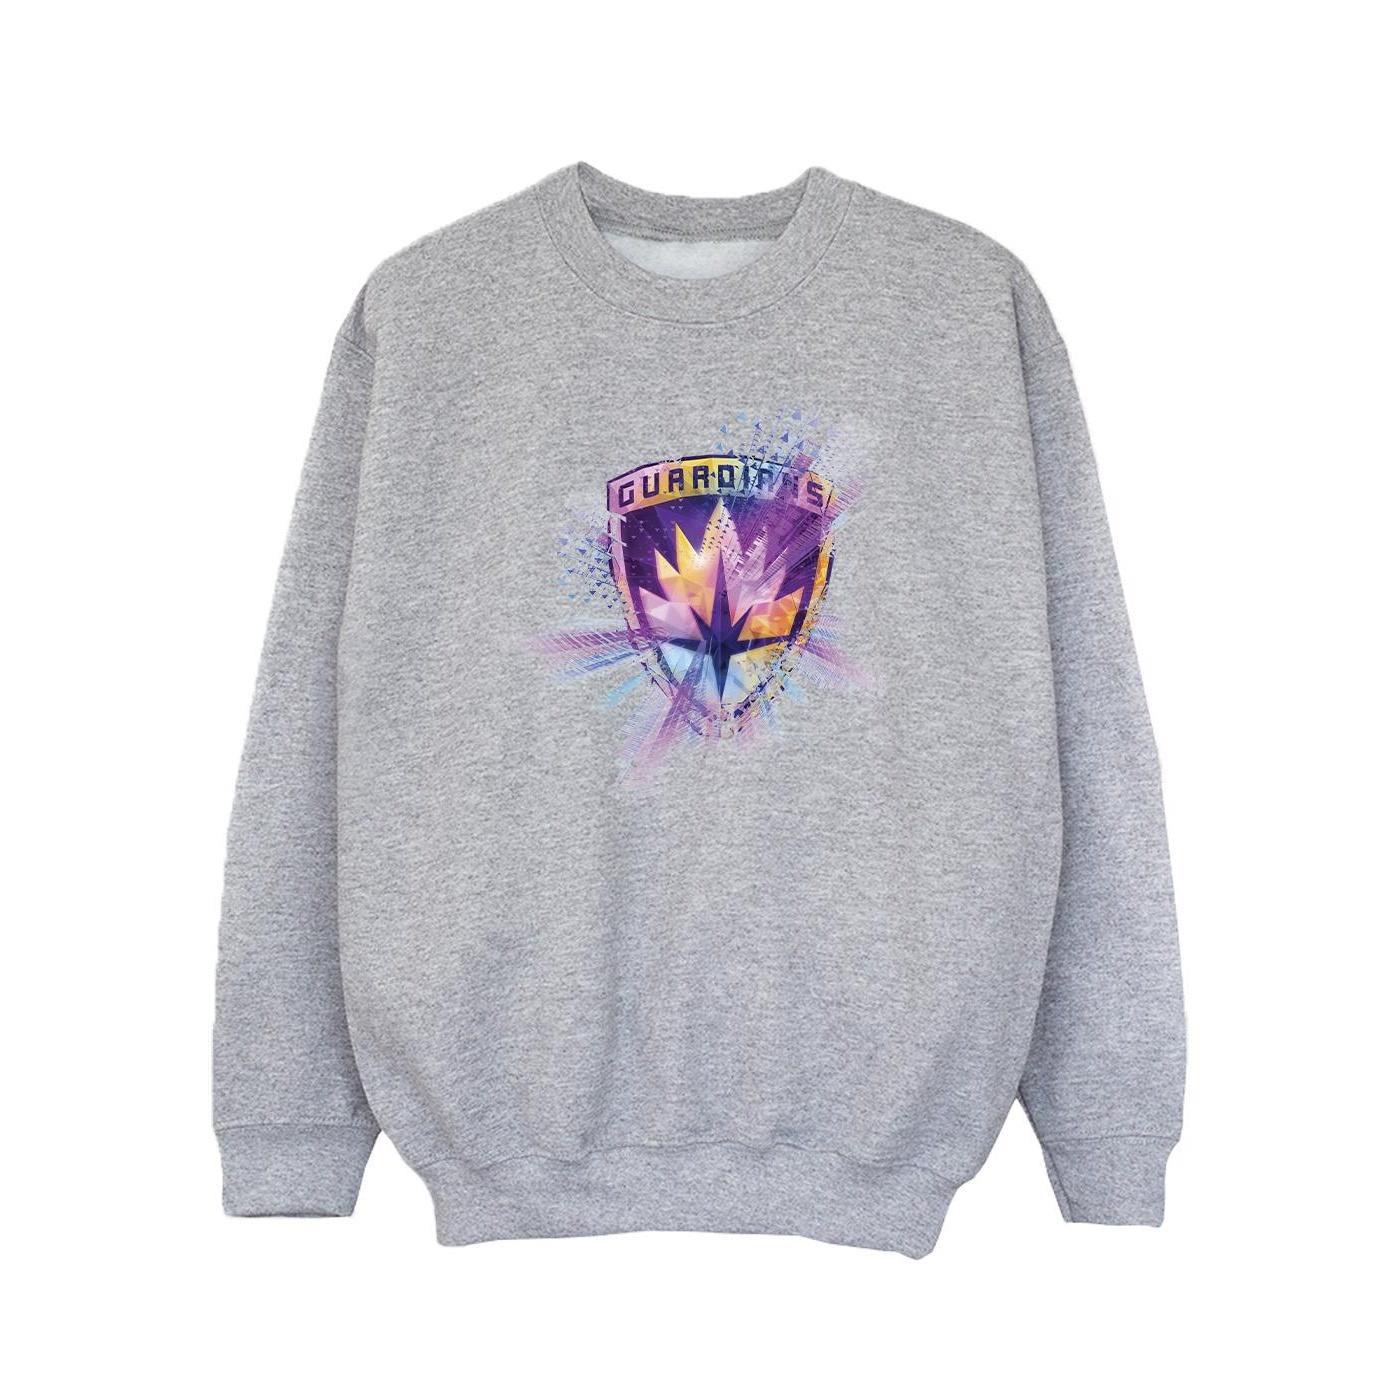 Marvel Girls Guardians Of The Galaxy Abstract Star Lord Sweatshirt (Sports Grey) (5-6 Years)